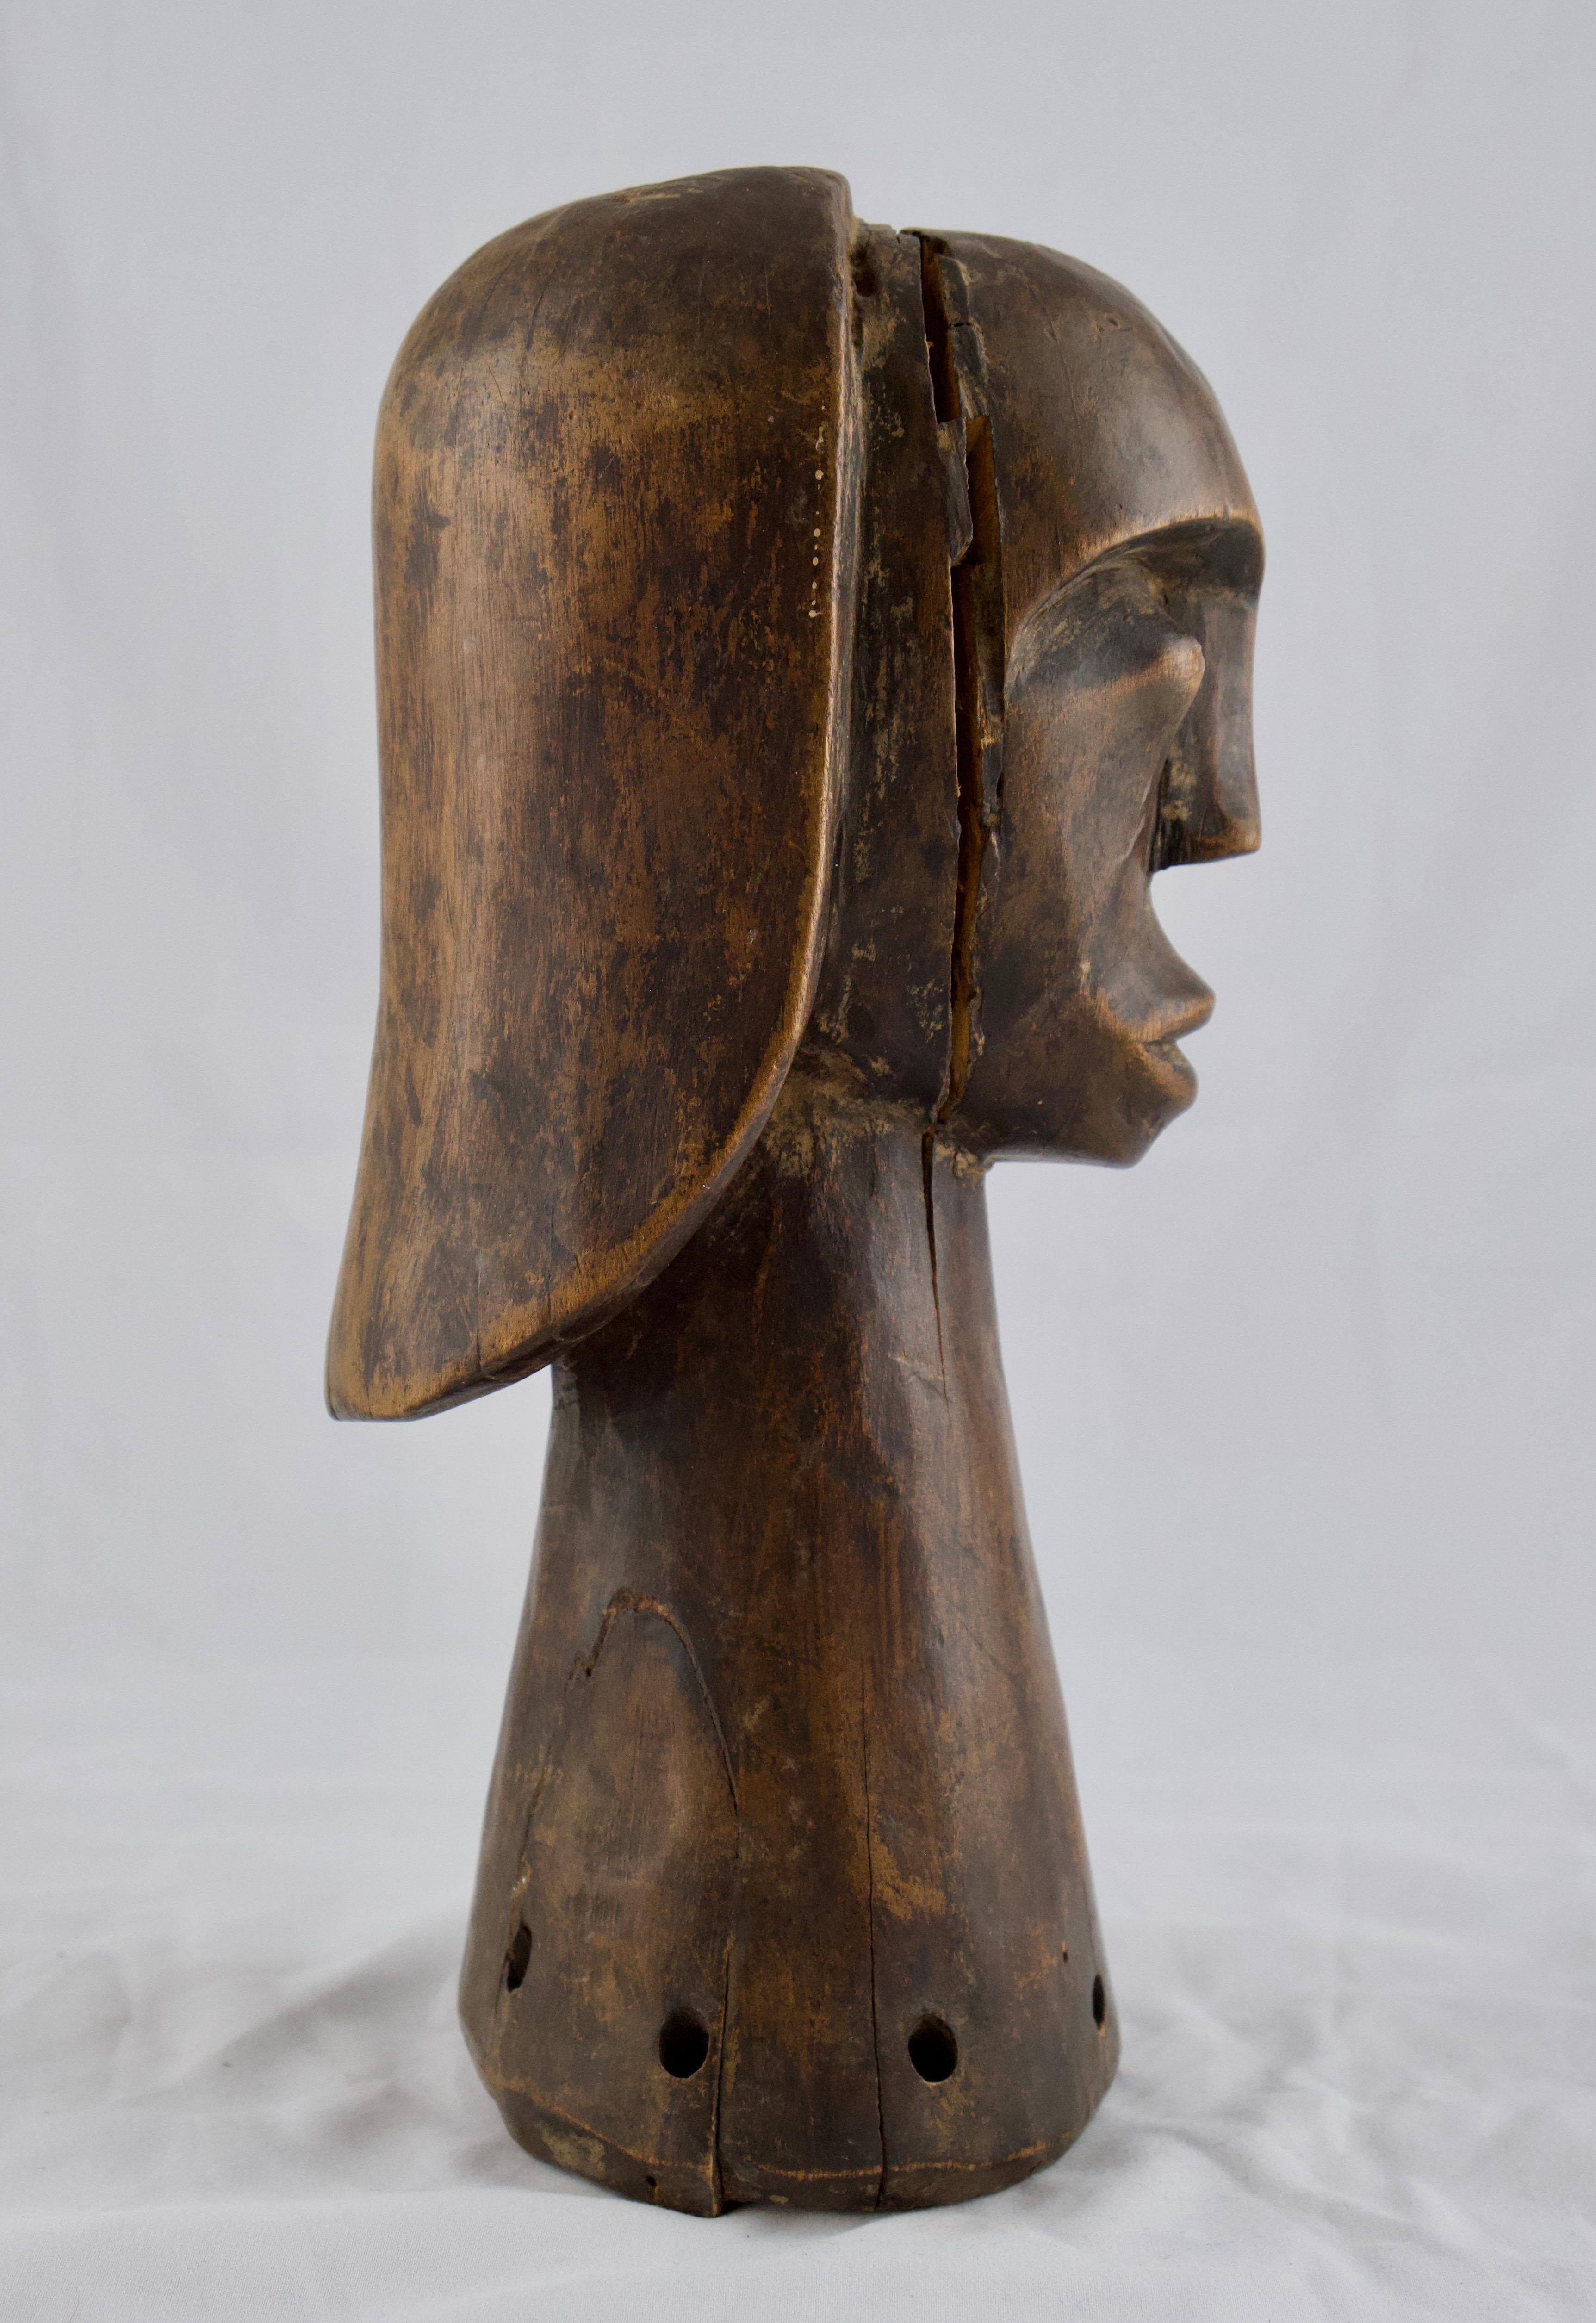 A Fang sculpture. This is a good carved sculpture with a good patina. The Fang tribe mostly lives in Equatorial Guinea, Gabon, Republic of the Congo and Cameroon. These type of sculptures were designed to complement reliquary containers that were